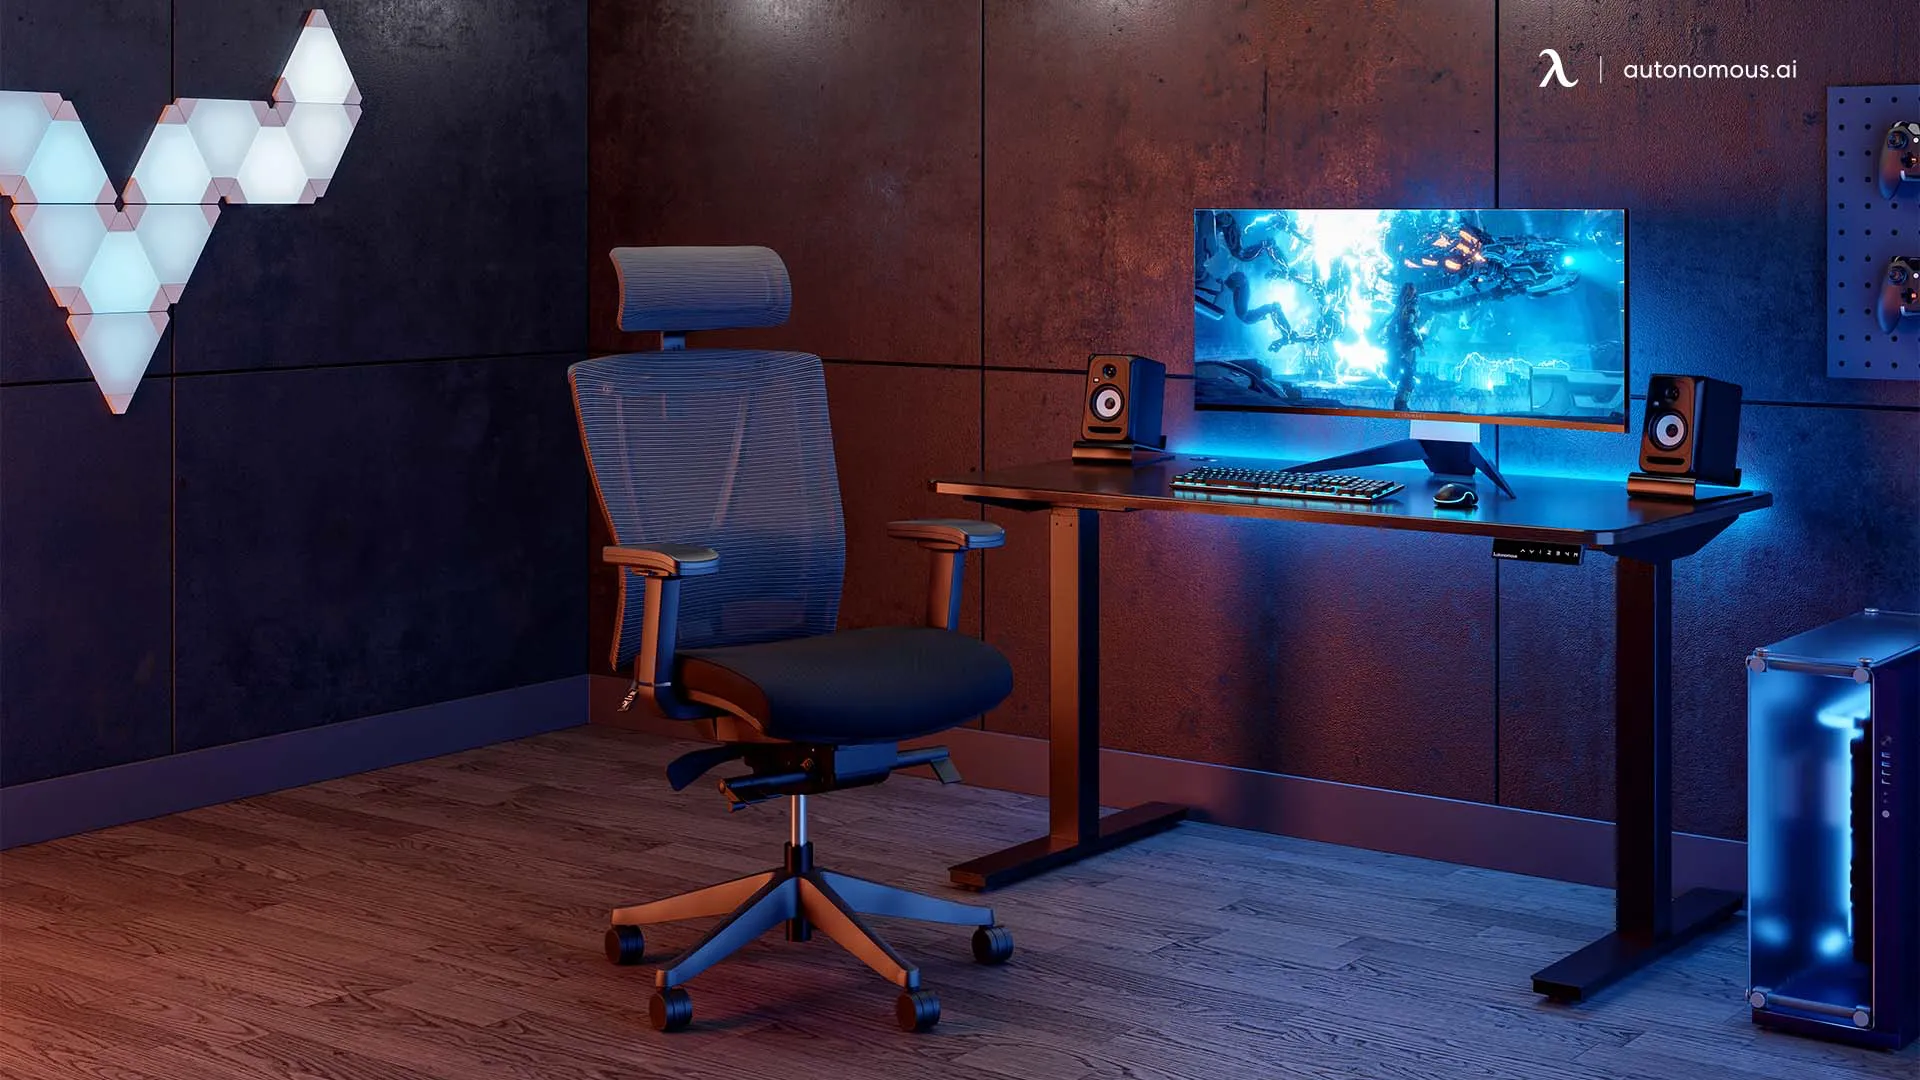 The Setup Should Include a Gaming Chair